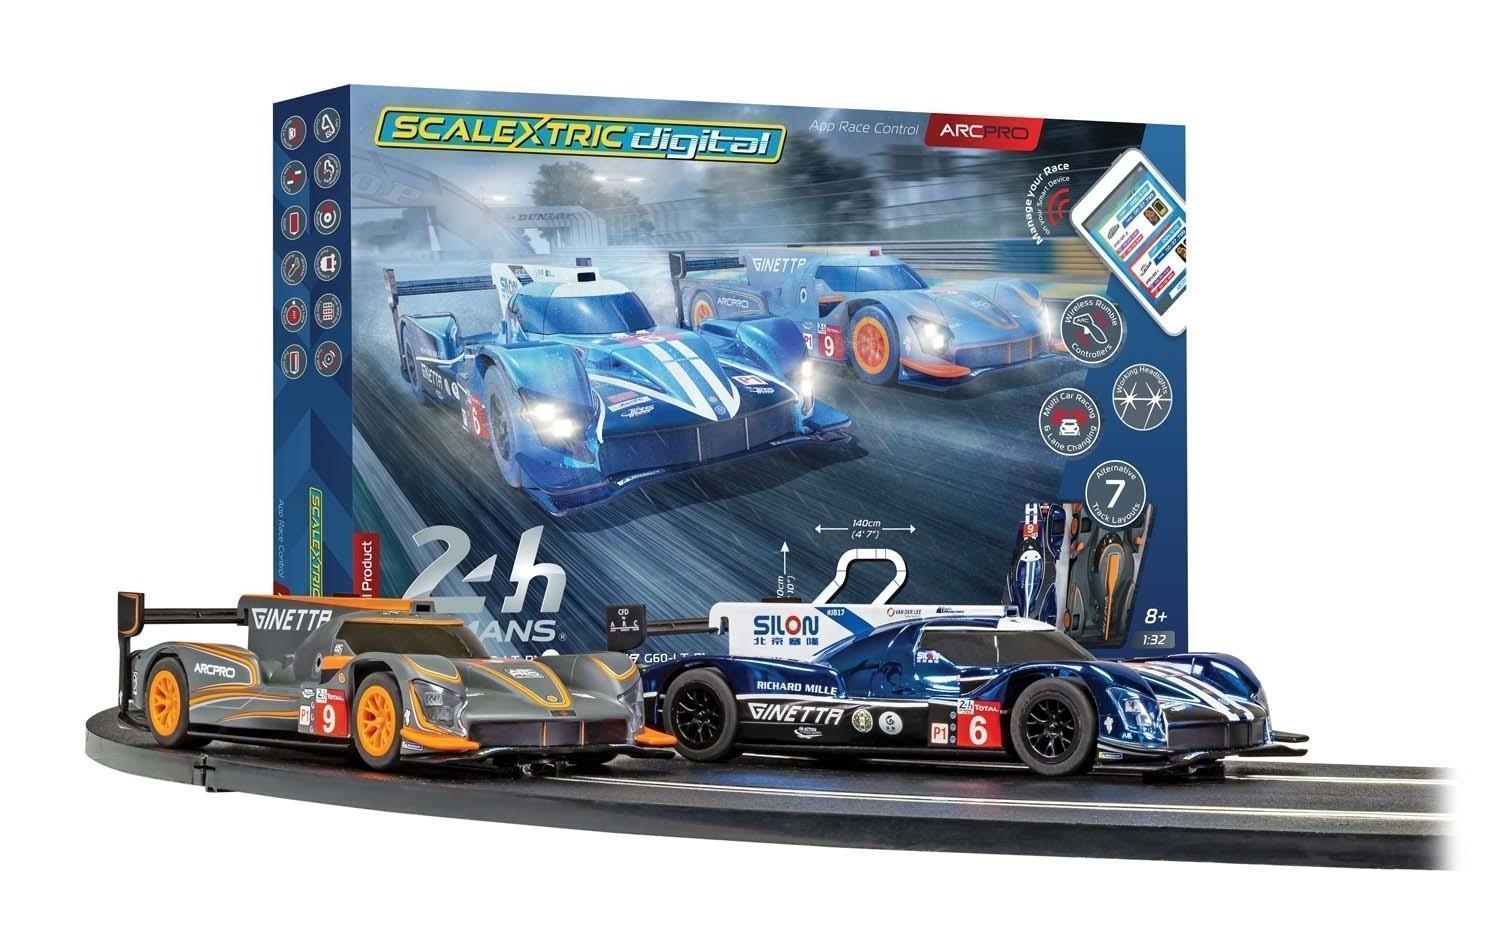 Scalextric Arch Pro 24h Le Mans Ginetta G60-LT-P1 1:32 Scale Track, Cars and Controller Included Model Slot Car